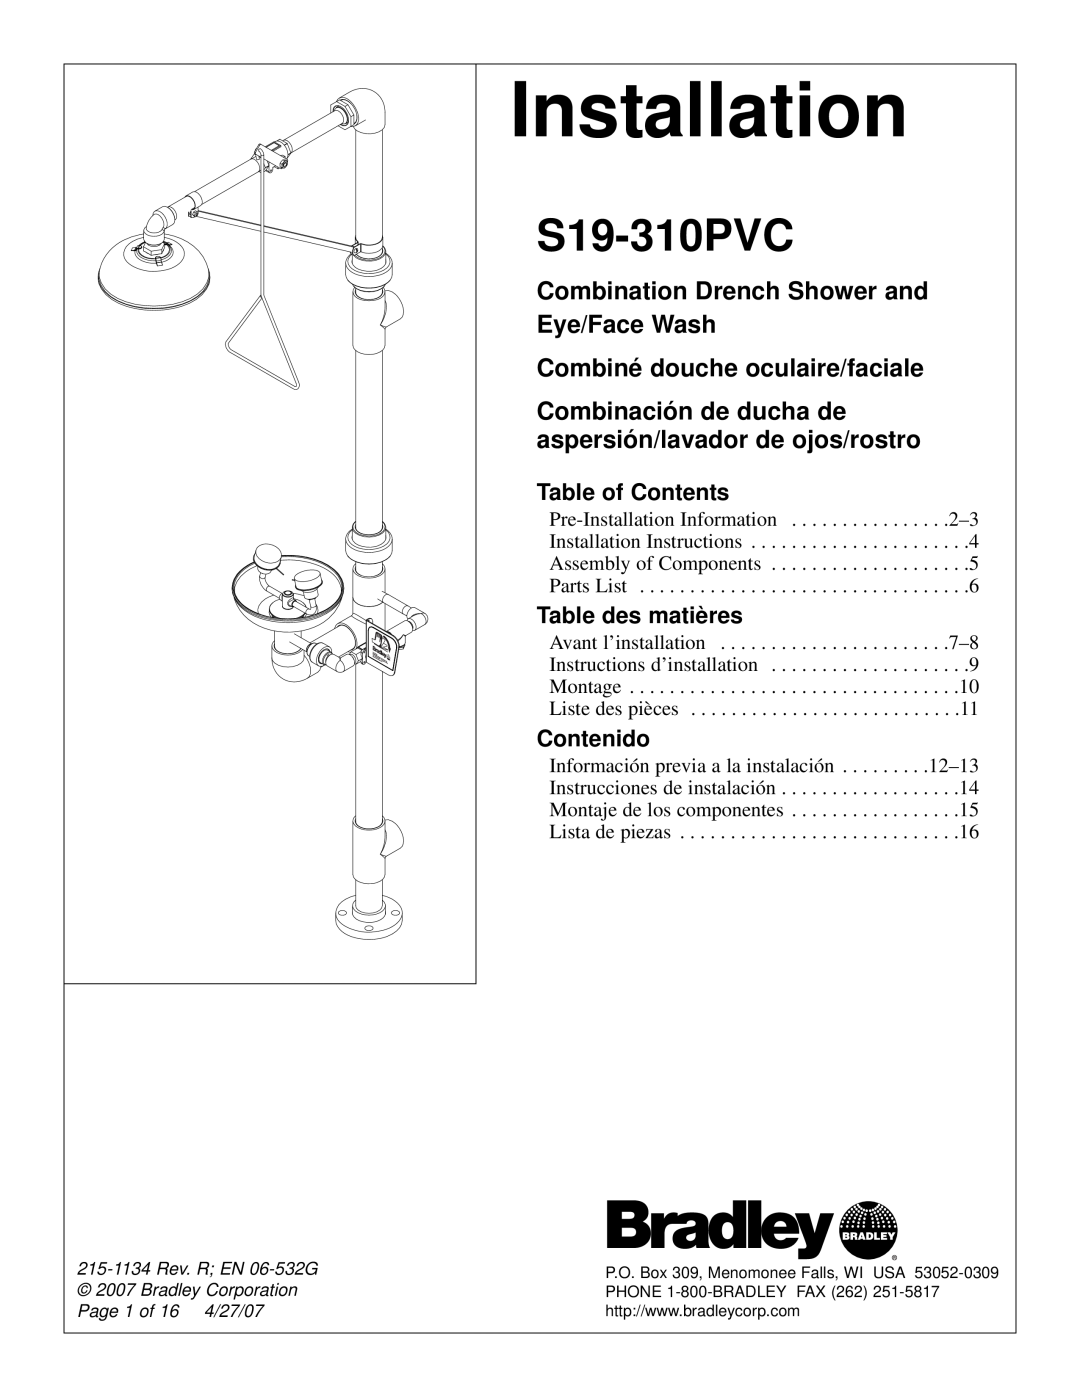 Bradley Smoker S19-310PVC installation instructions Table of Contents, Table des matières, Contenido, Installation 